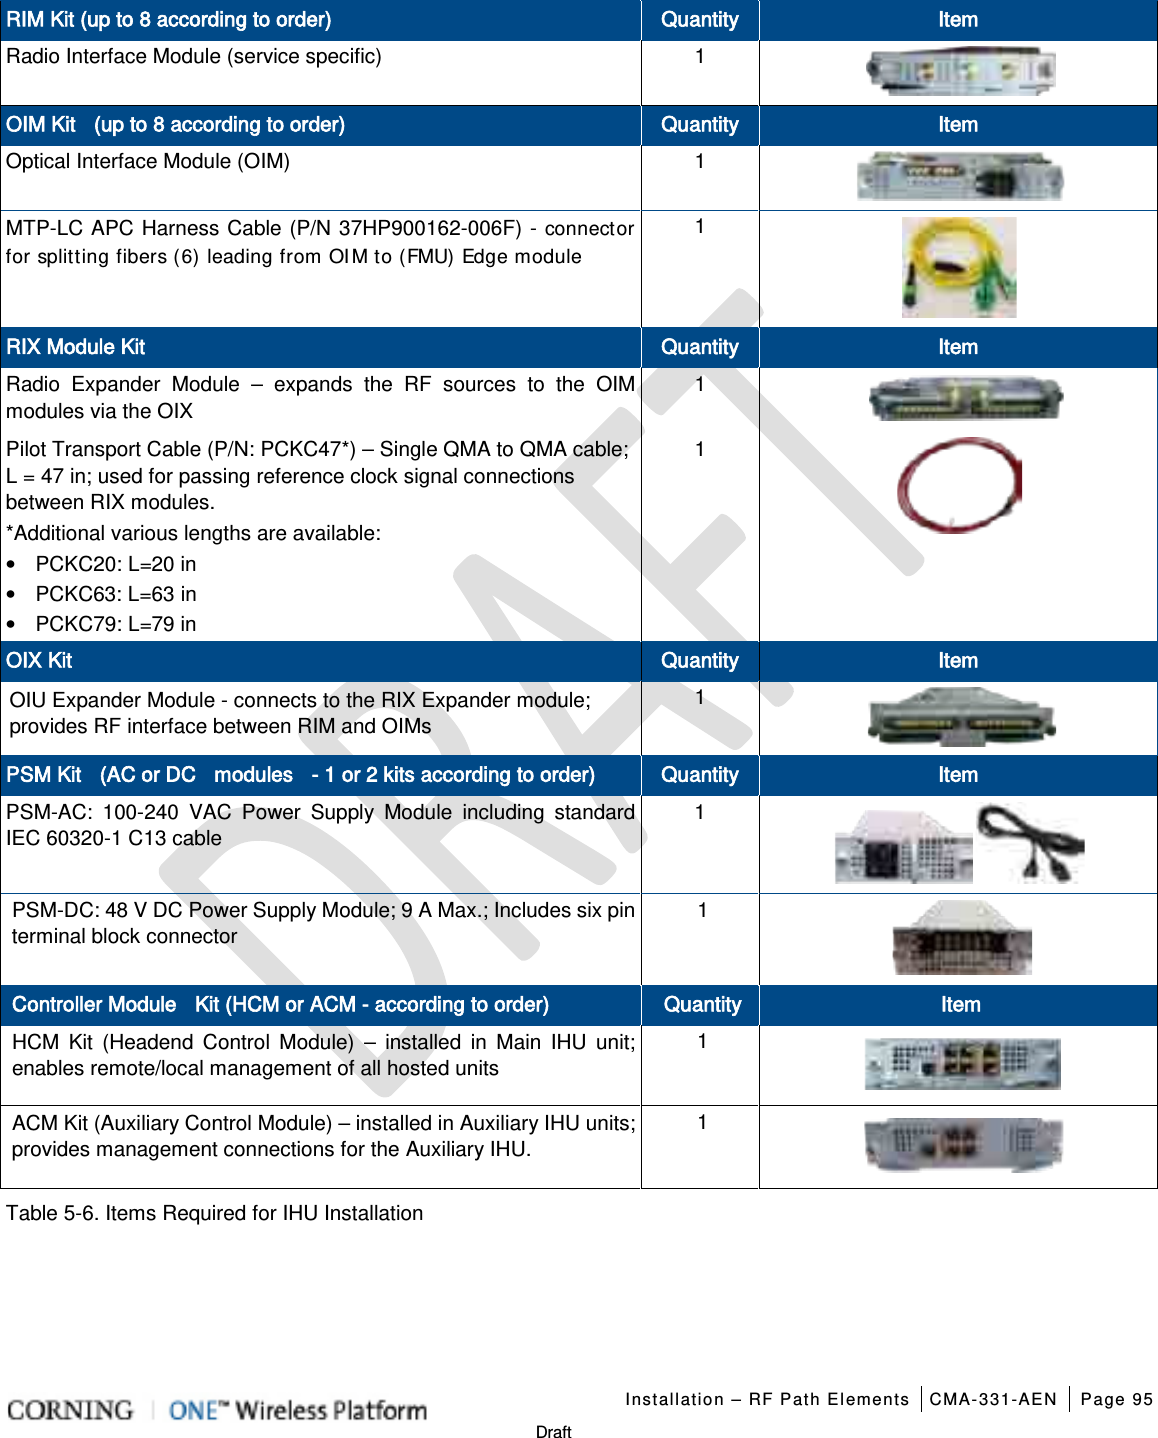   Installation – RF Path Elements CMA-331-AEN Page 95   Draft RIM Kit (up to 8 according to order) Quantity Item Radio Interface Module (service specific)  1  OIM Kit  (up to 8 according to order) Quantity Item Optical Interface Module (OIM)  1  MTP-LC APC Harness Cable (P/N 37HP900162-006F) - connector for splitting fibers (6) leading from OIM to (FMU) Edge module 1  RIX Module Kit   Quantity Item Radio Expander Module  –  expands the RF sources to the OIM modules via the OIX 1 Item Pilot Transport Cable (P/N: PCKC47*) – Single QMA to QMA cable;  L = 47 in; used for passing reference clock signal connections between RIX modules.   *Additional various lengths are available: • PCKC20: L=20 in • PCKC63: L=63 in • PCKC79: L=79 in 1  OIX Kit Quantity Item OIU Expander Module - connects to the RIX Expander module; provides RF interface between RIM and OIMs 1  PSM Kit  (AC or DC  modules  - 1 or 2 kits according to order) Quantity Item PSM-AC: 100-240 VAC  Power Supply Module including  standard IEC 60320-1 C13 cable 1  PSM-DC: 48 V DC Power Supply Module; 9 A Max.; Includes six pin terminal block connector 1  Controller Module    Kit (HCM or ACM - according to order) Quantity Item HCM Kit (Headend Control Module)  – installed in Main IHU unit; enables remote/local management of all hosted units   1  ACM Kit (Auxiliary Control Module) – installed in Auxiliary IHU units; provides management connections for the Auxiliary IHU. 1  Table  5-6. Items Required for IHU Installation   